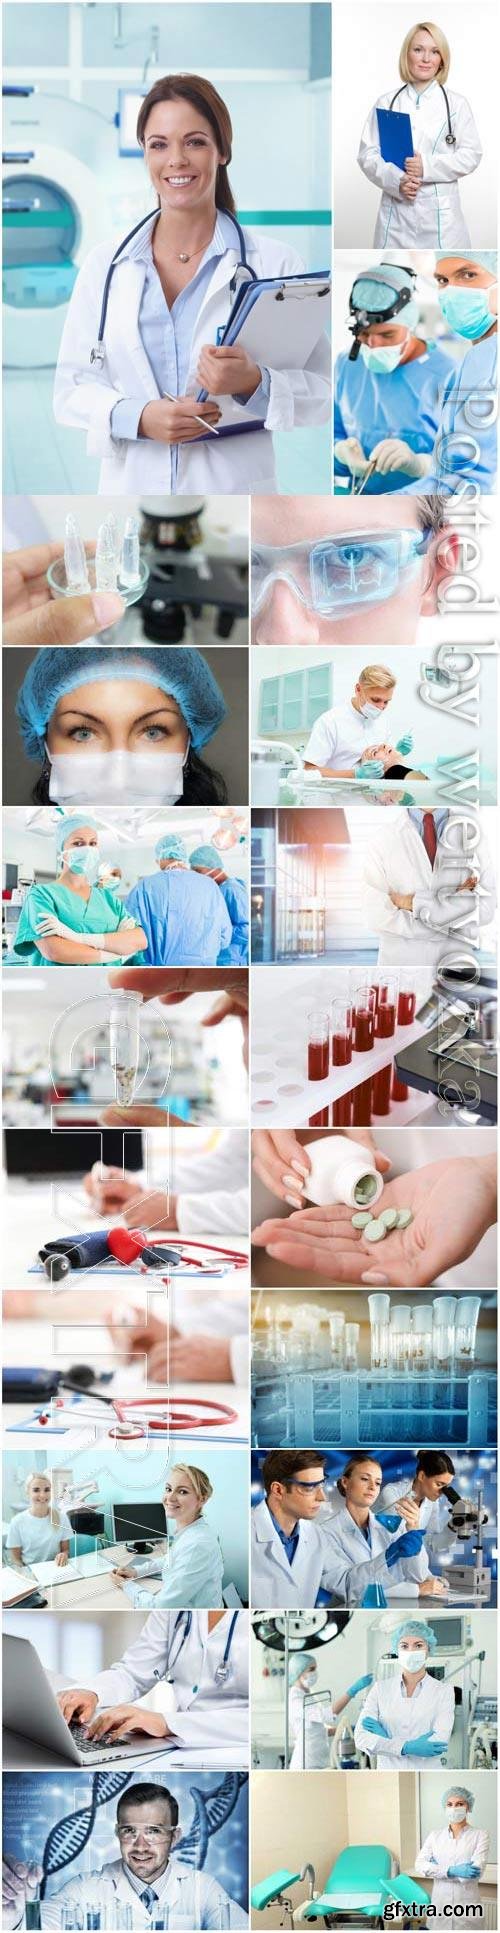 Medical set of doctors in the laboratory stock photo